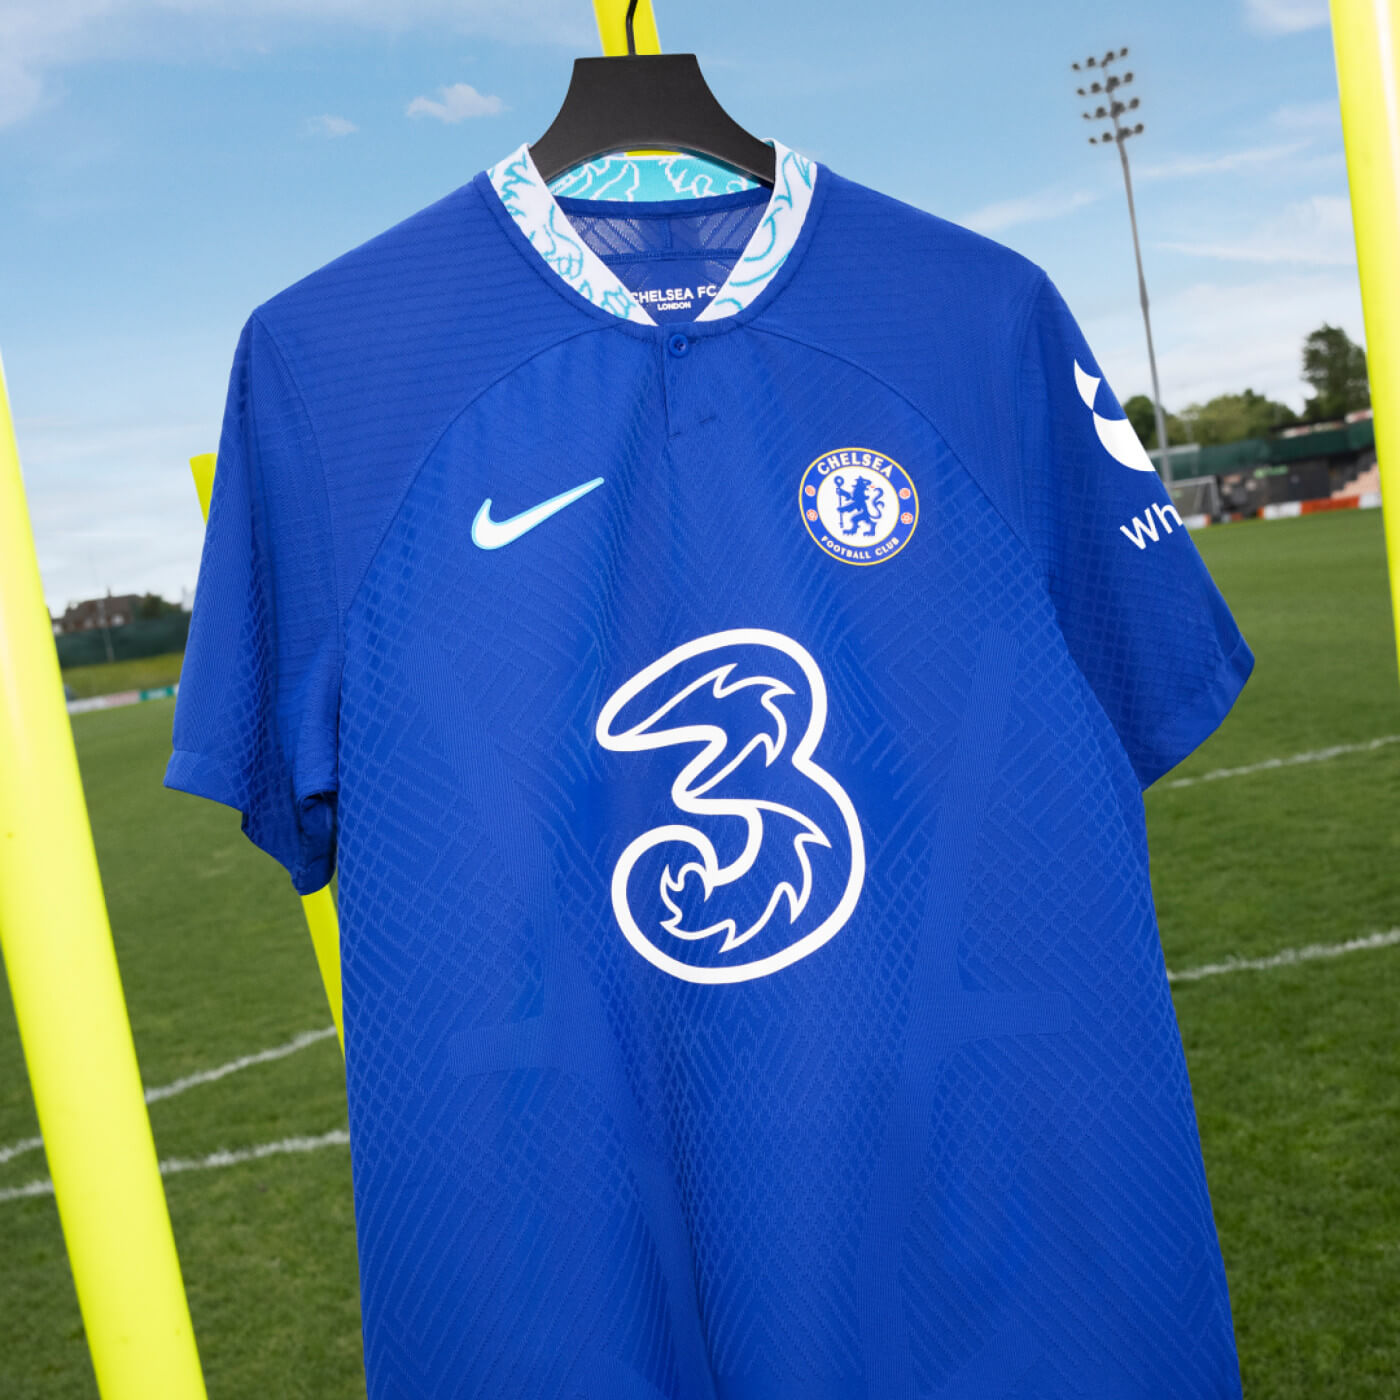 22/23 Chelsea home jersey